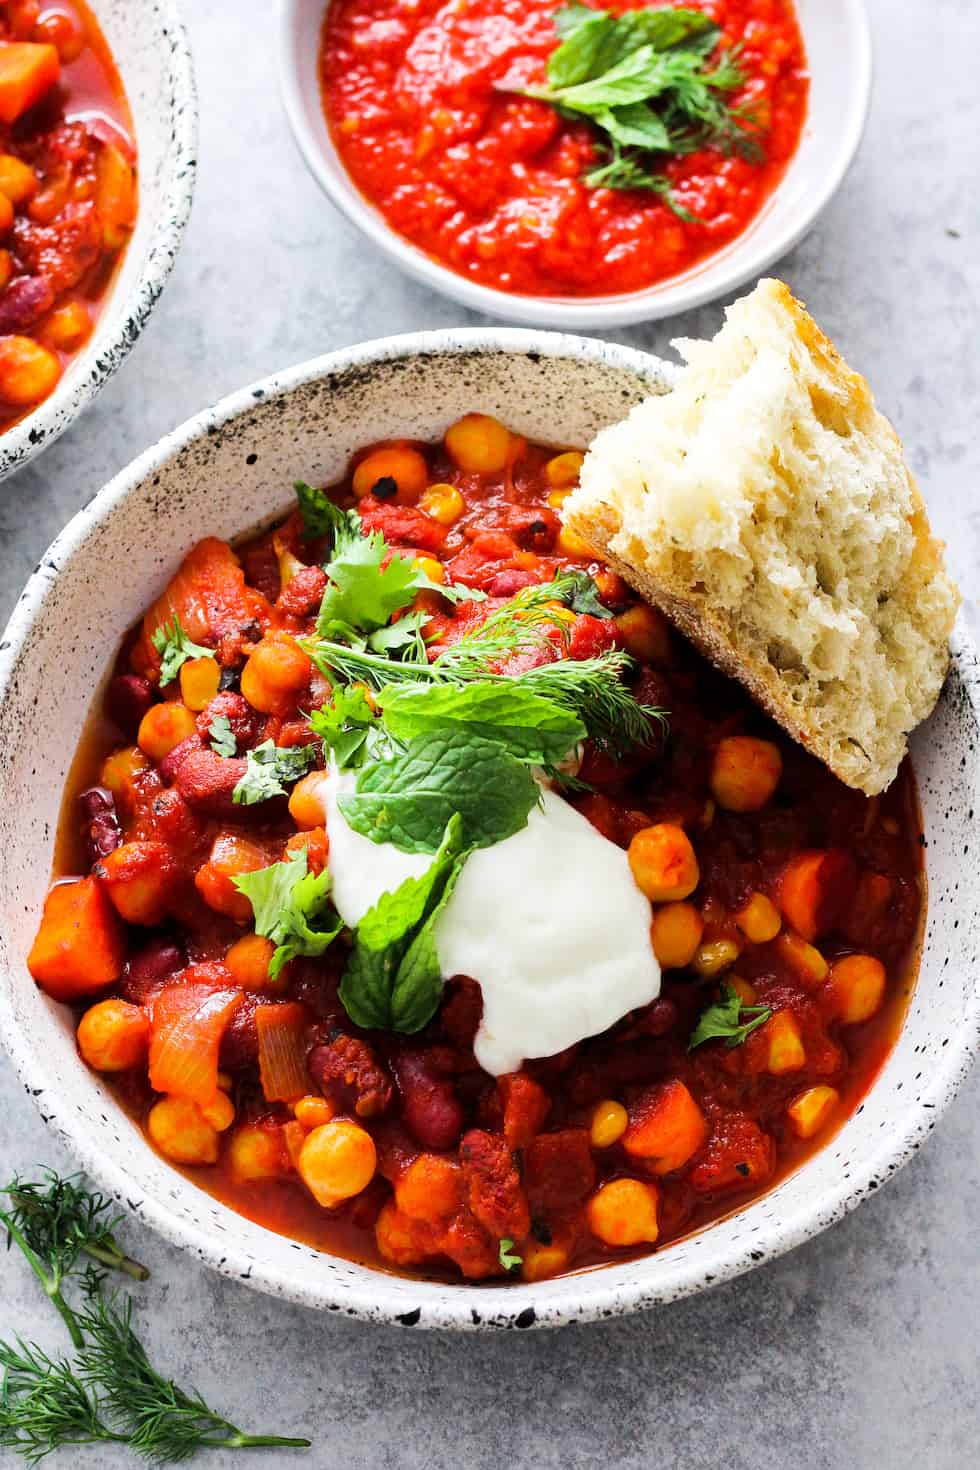 Bean chili with harissa in white stone bowl with yogurt, fresh herbs, and bread on top.